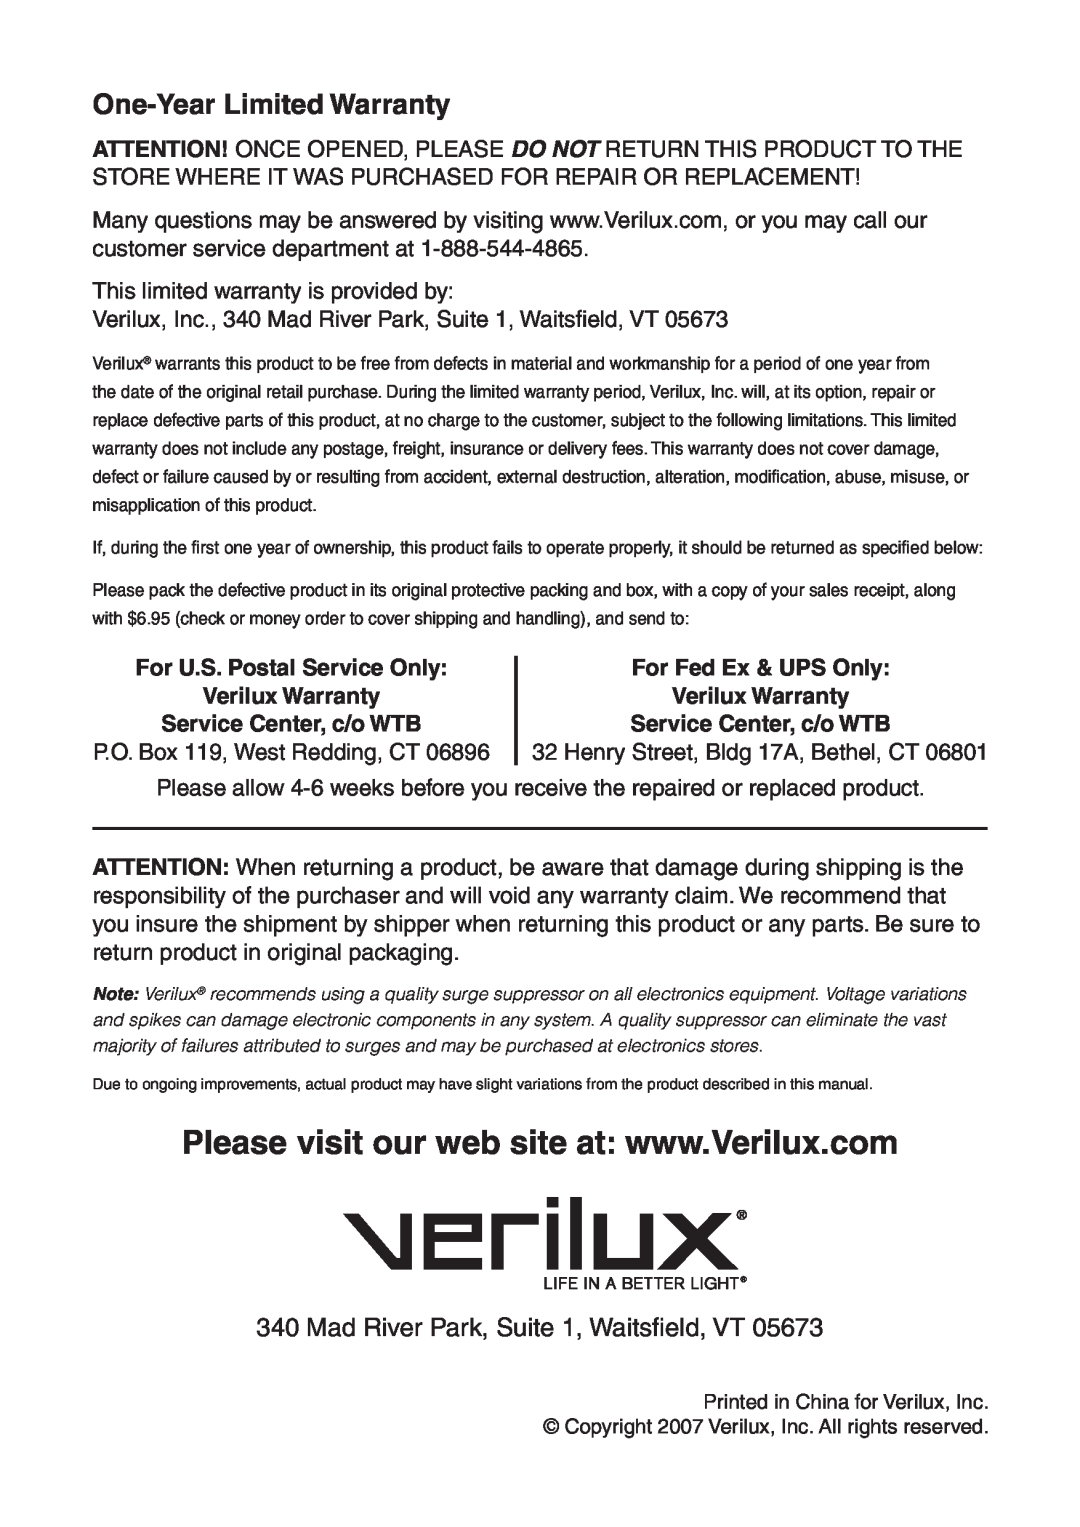 Verilux VF05 manual One-YearLimited Warranty, Mad River Park, Suite 1, Waitsﬁeld, VT, Service Center, c/o WTB 